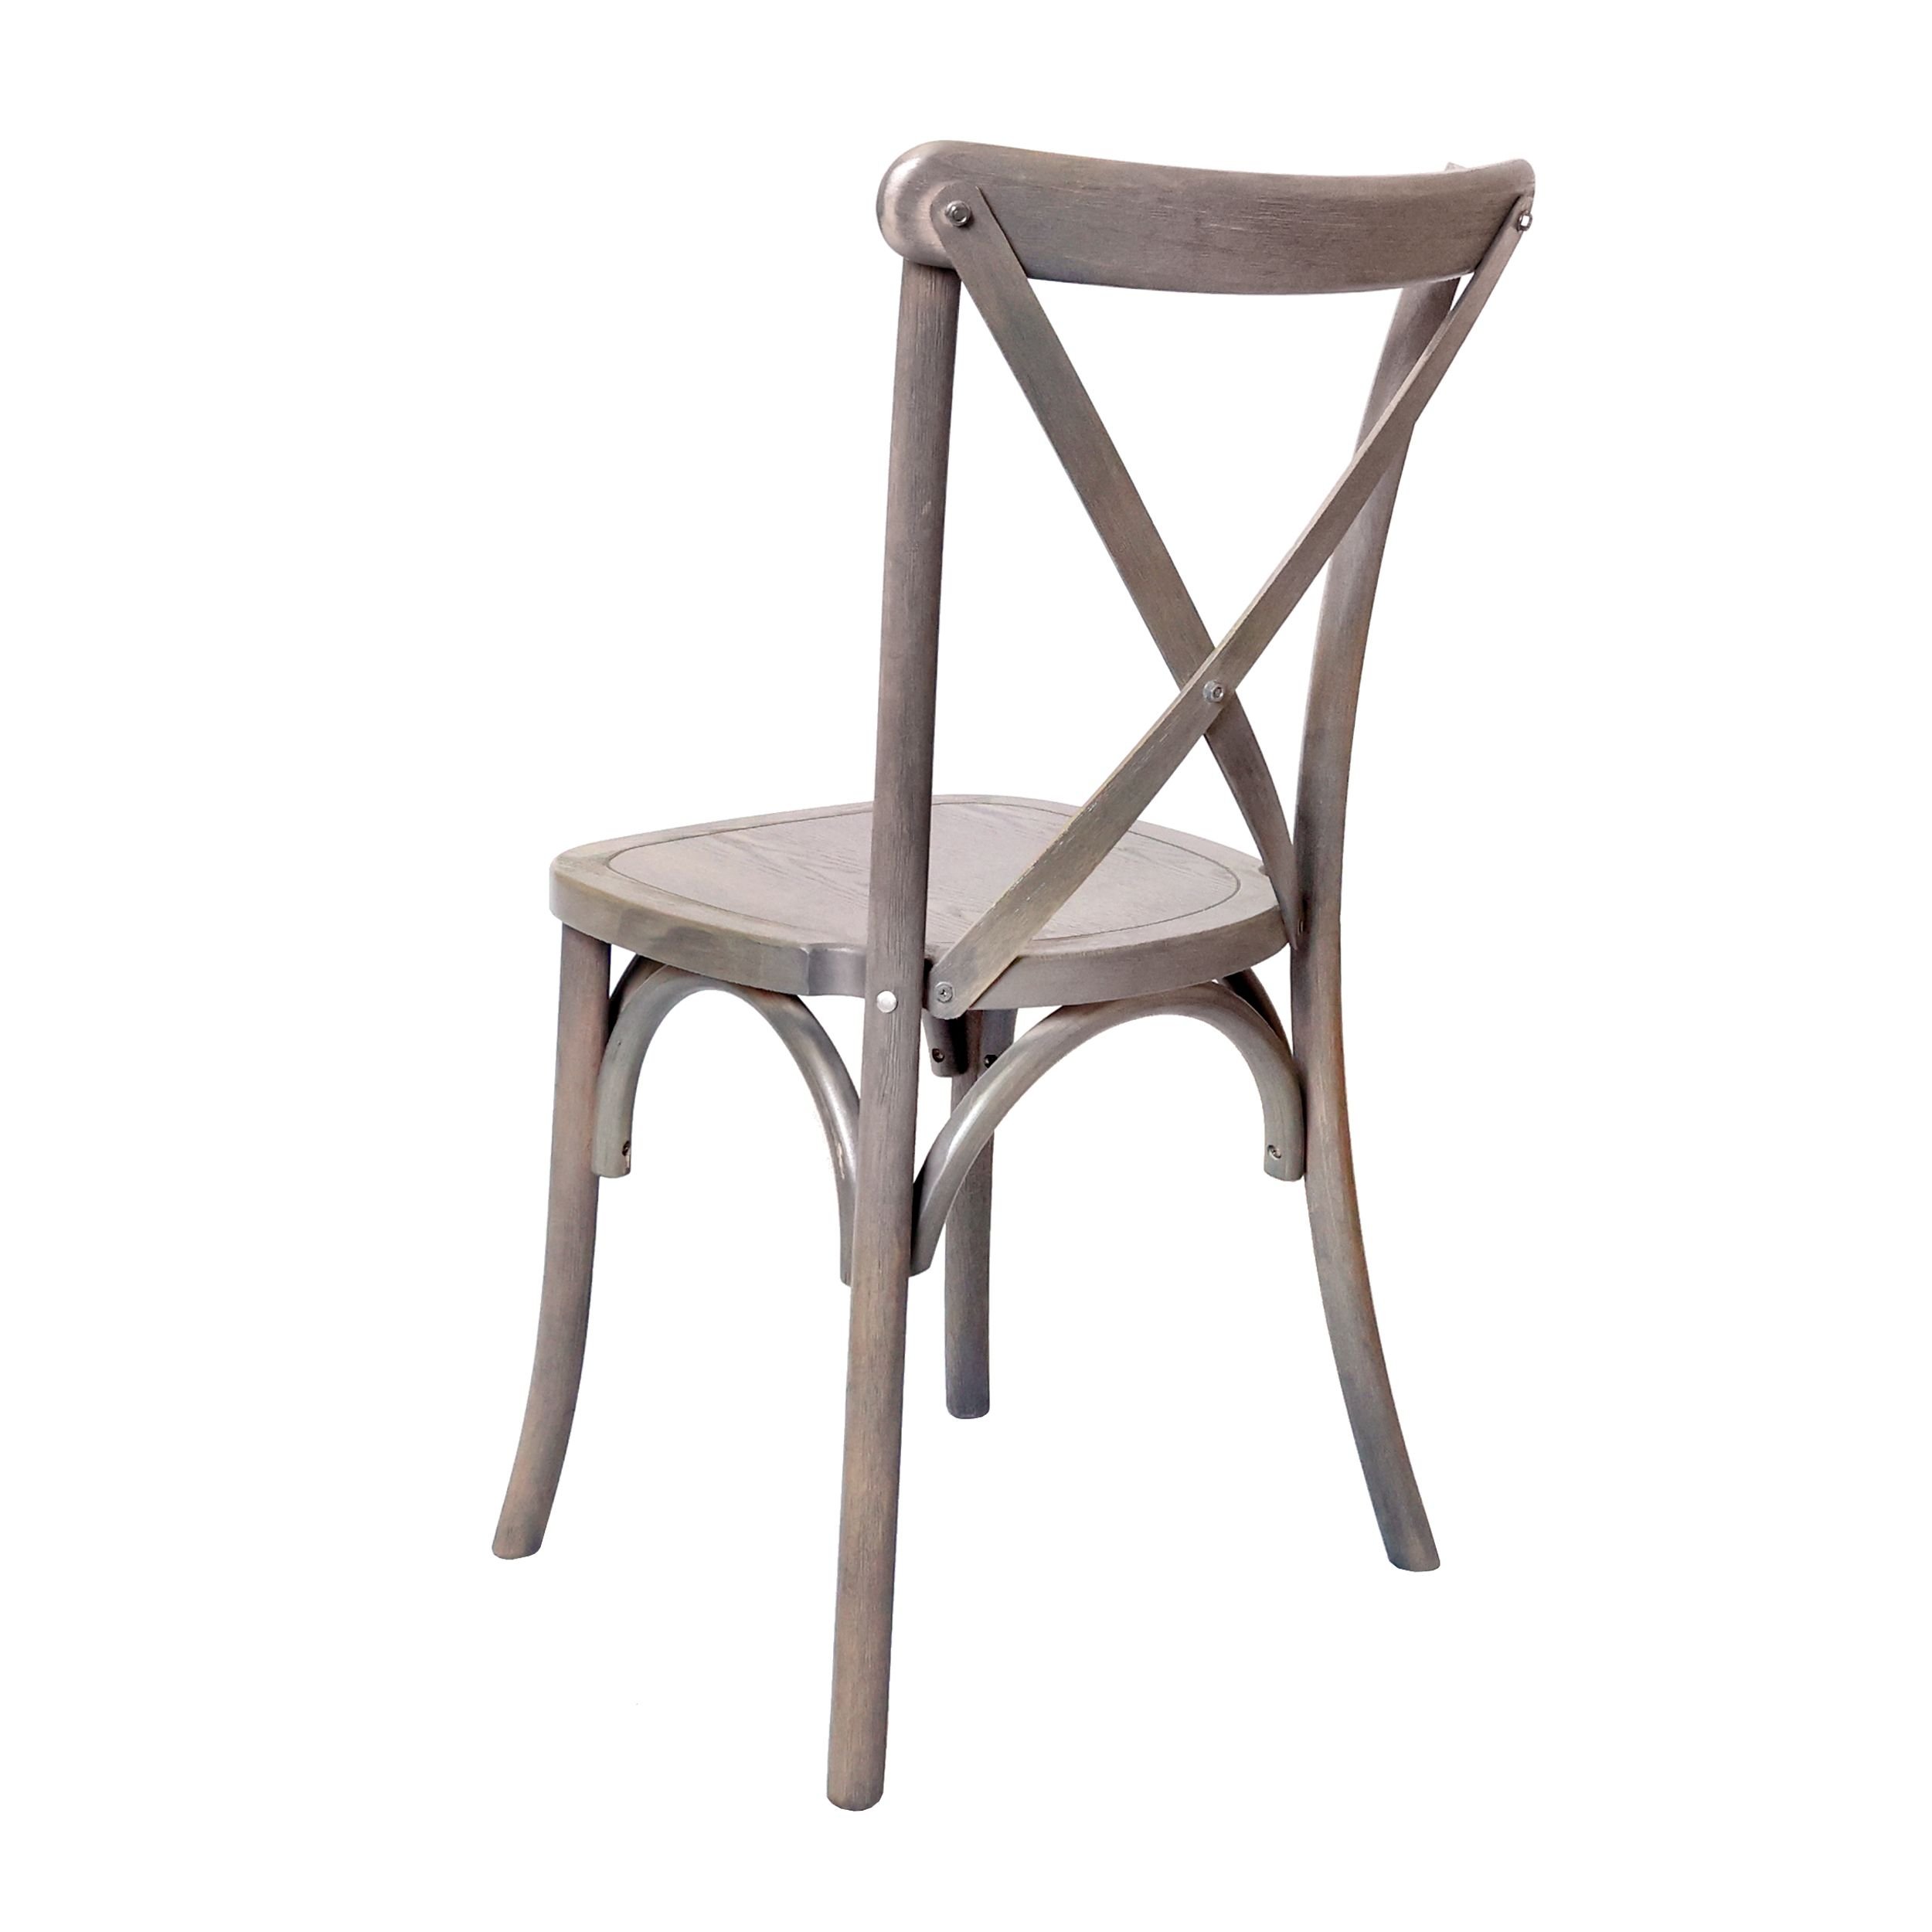 Chair Crossback Wood Driftwood Gray Z Series CXWG ZG T Swatch